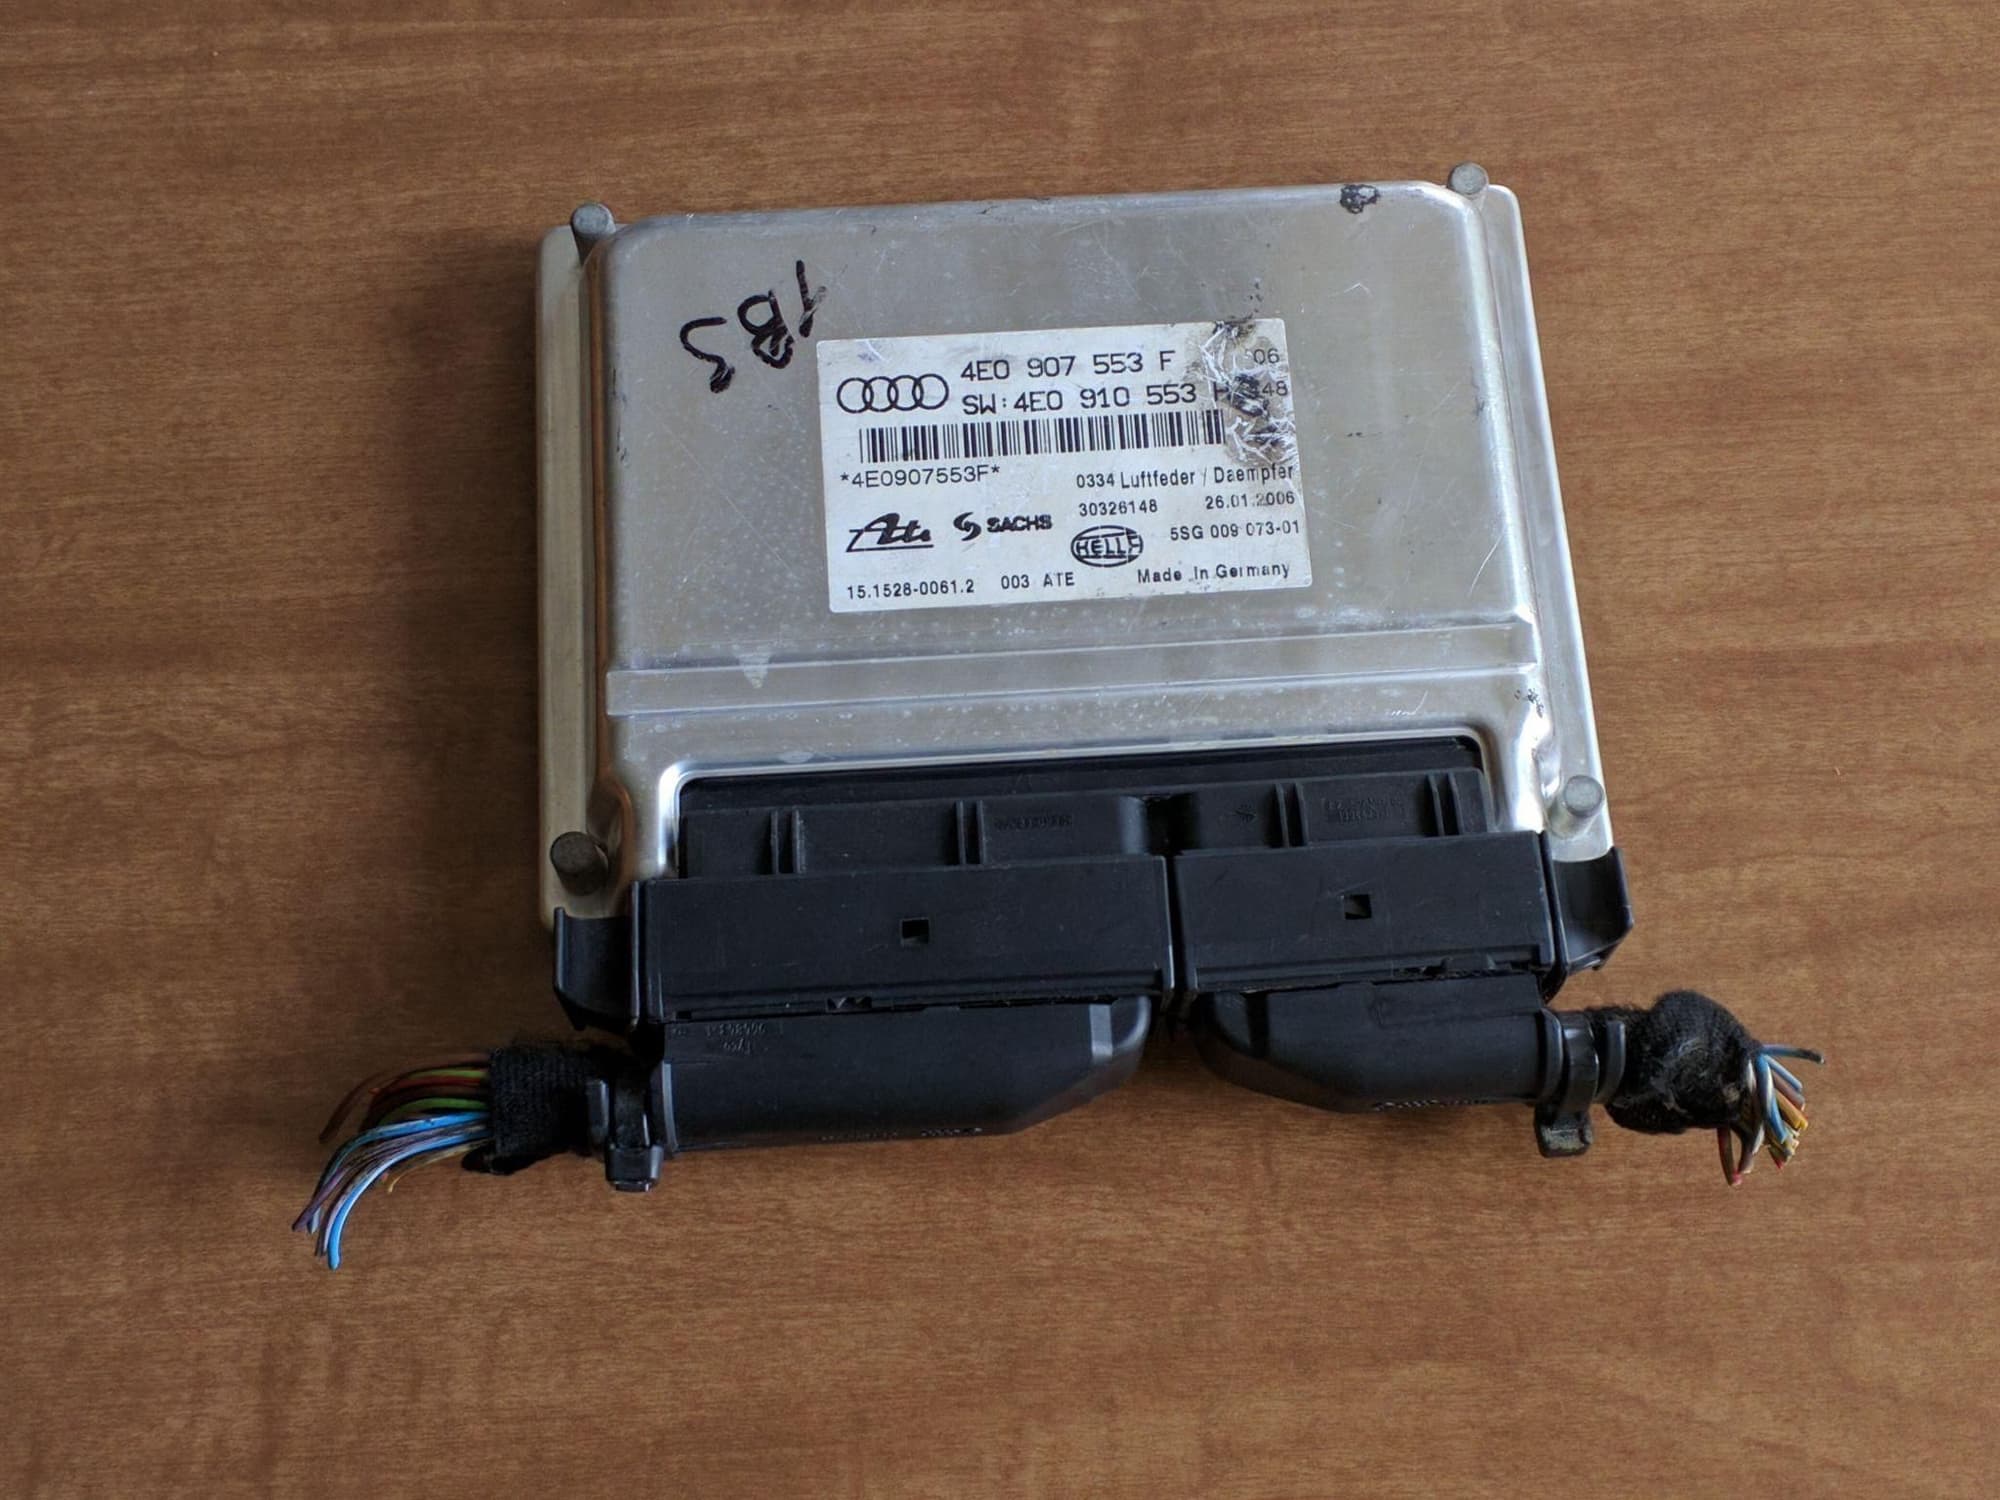 Steering/Suspension - Active Suspension Control Module for Audi A8/S8 D3 (4e0907553f) - Used - 2004 to 2007 Audi A8 - Bolivar, MO 65613, United States